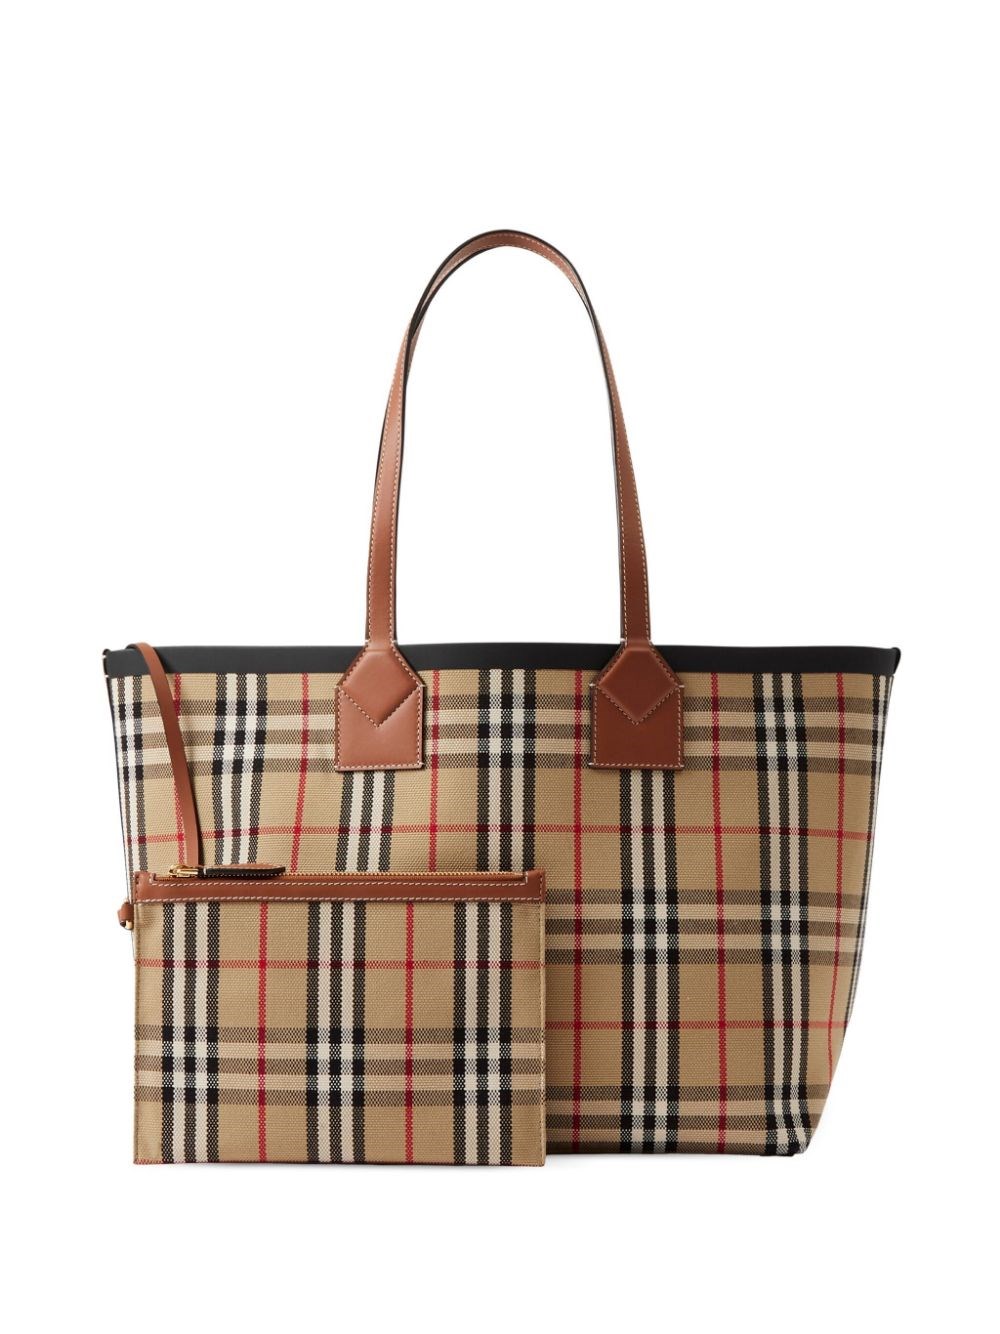 Shop Burberry Outlet Messenger & Shoulder Bags by BuyDE | BUYMA